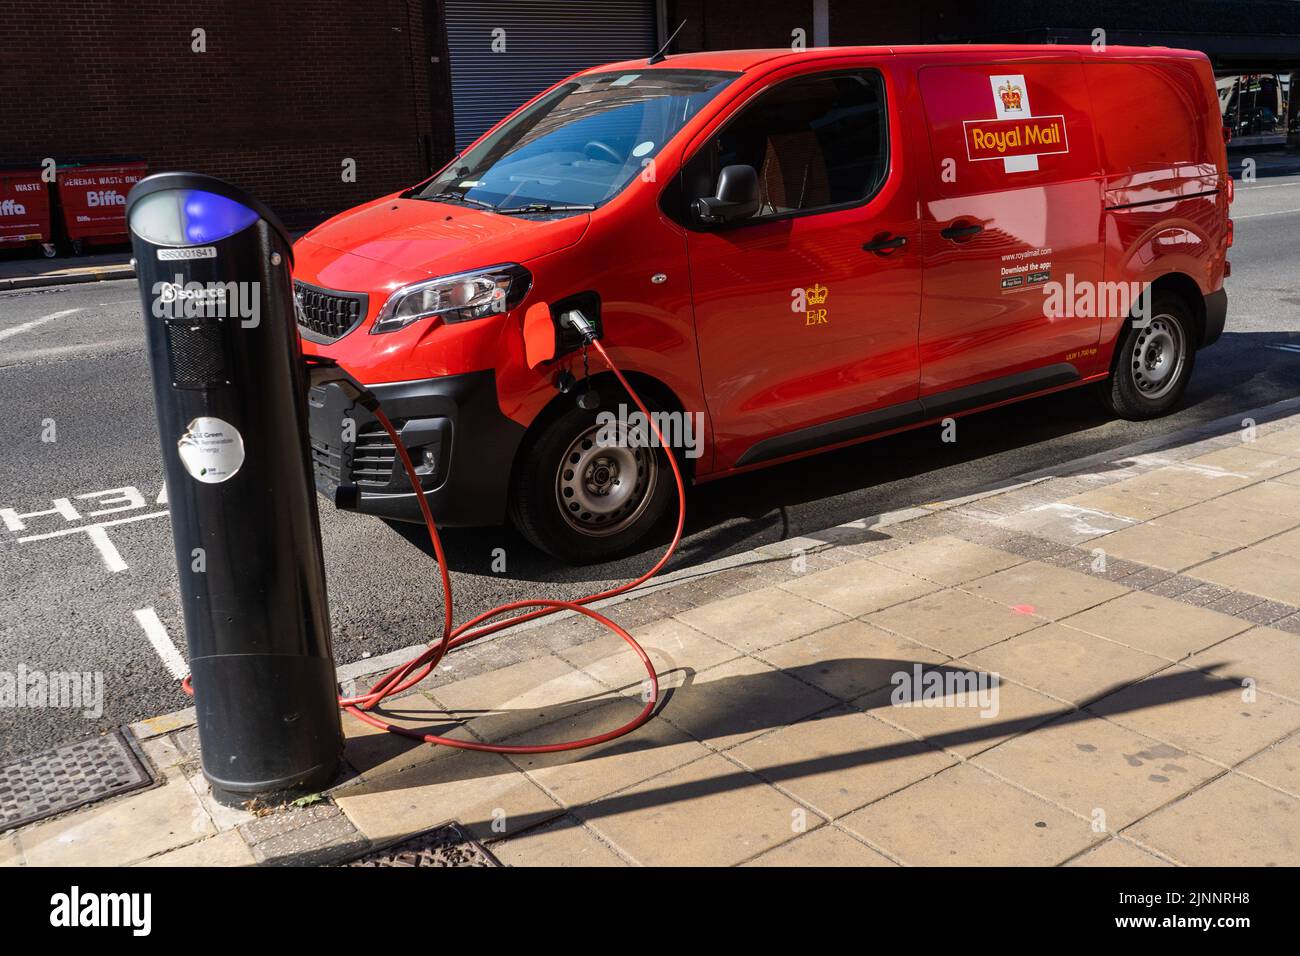 12 August 2022: Royal Mail delivery van at electric charging station, London, UK Stock Photo